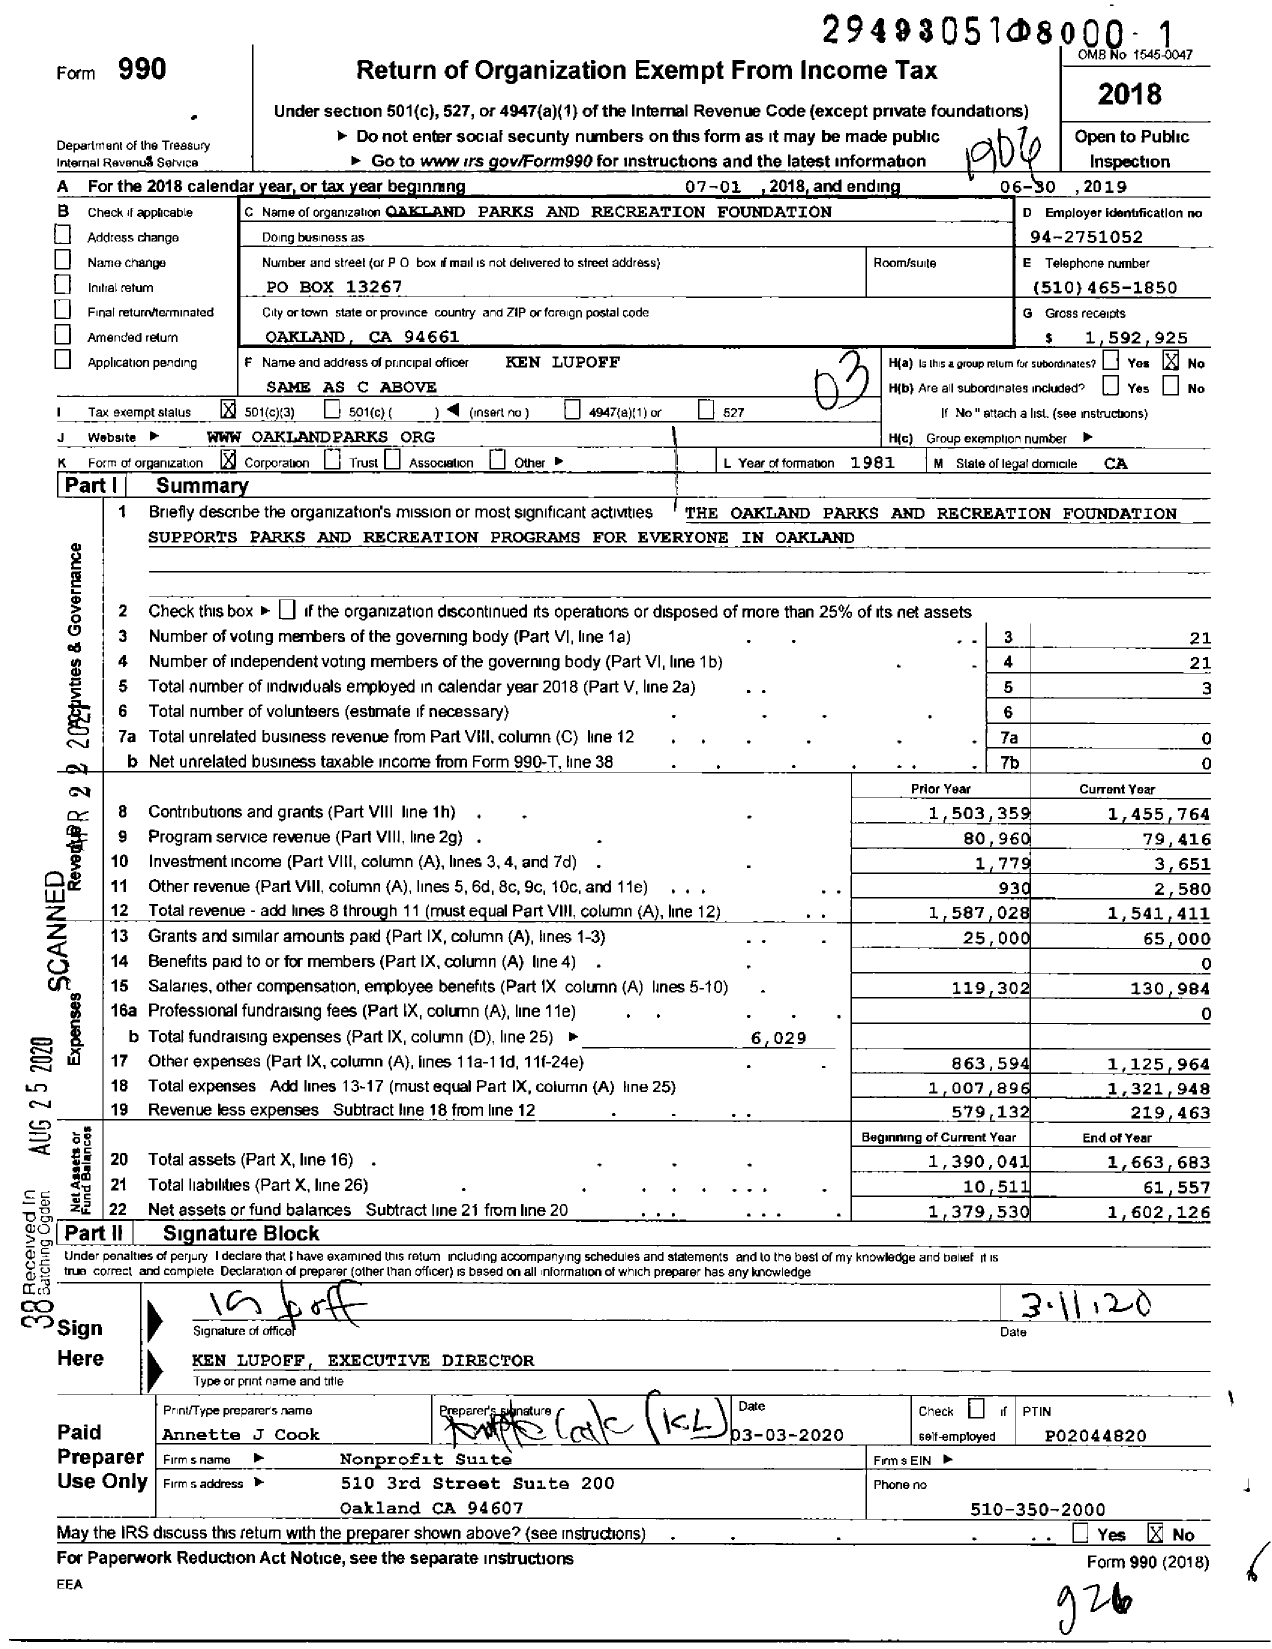 Image of first page of 2018 Form 990 for Oakland Parks and Recreation Foundation